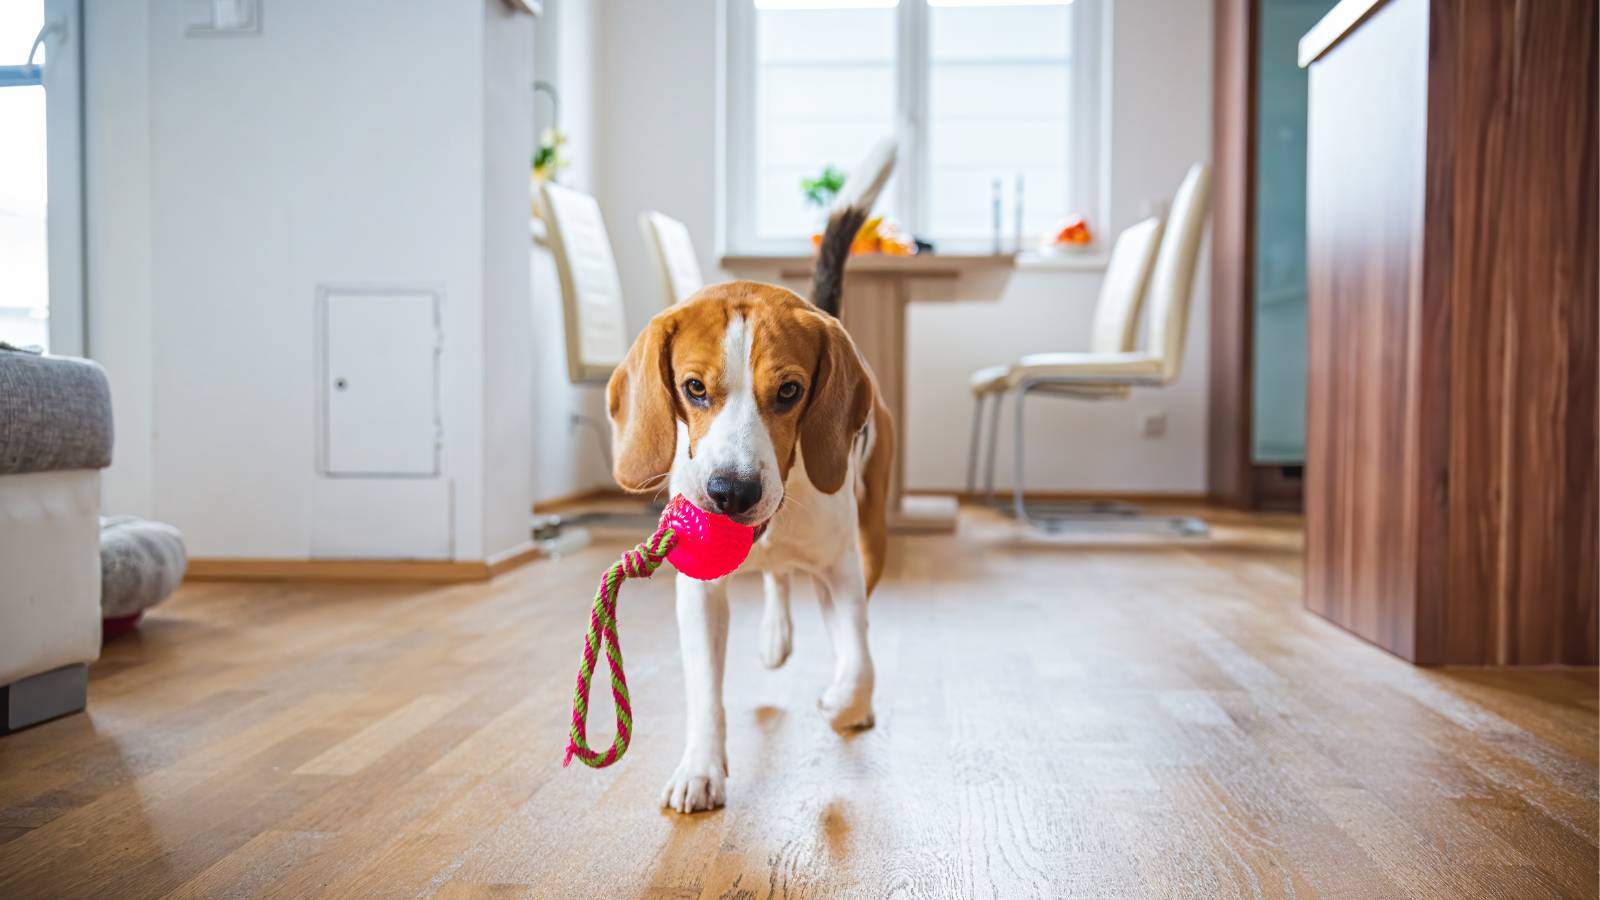 Fetch and tug can be modified to be played inside